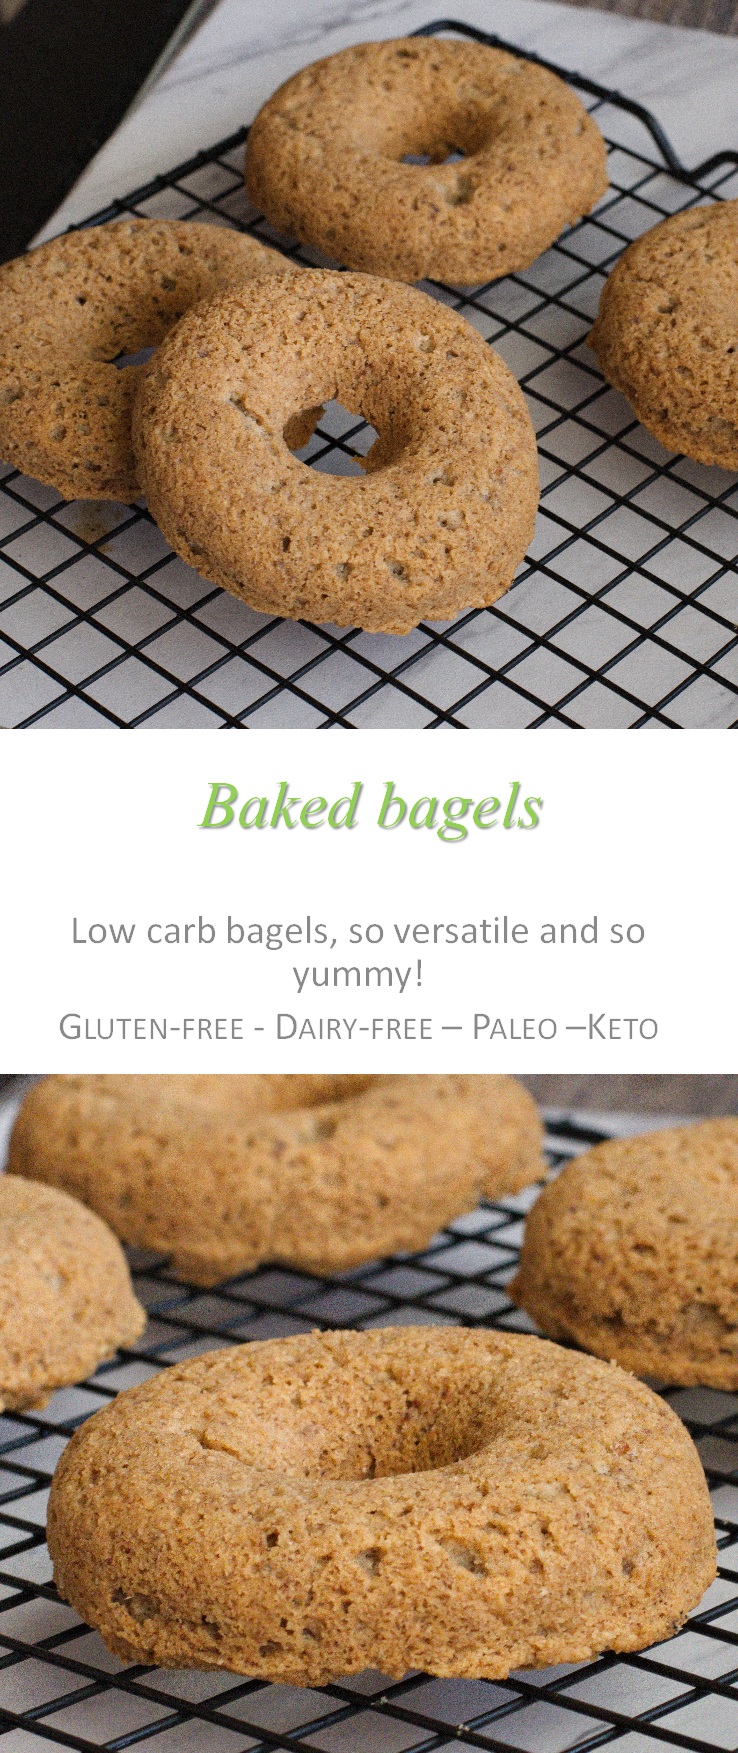 Bagels, baked in the oven, low-carb and dairy-free.  Totally awesome for any toppings you desire! #bagels #cookathome #paleo #glutenfree #dairyfree #keto